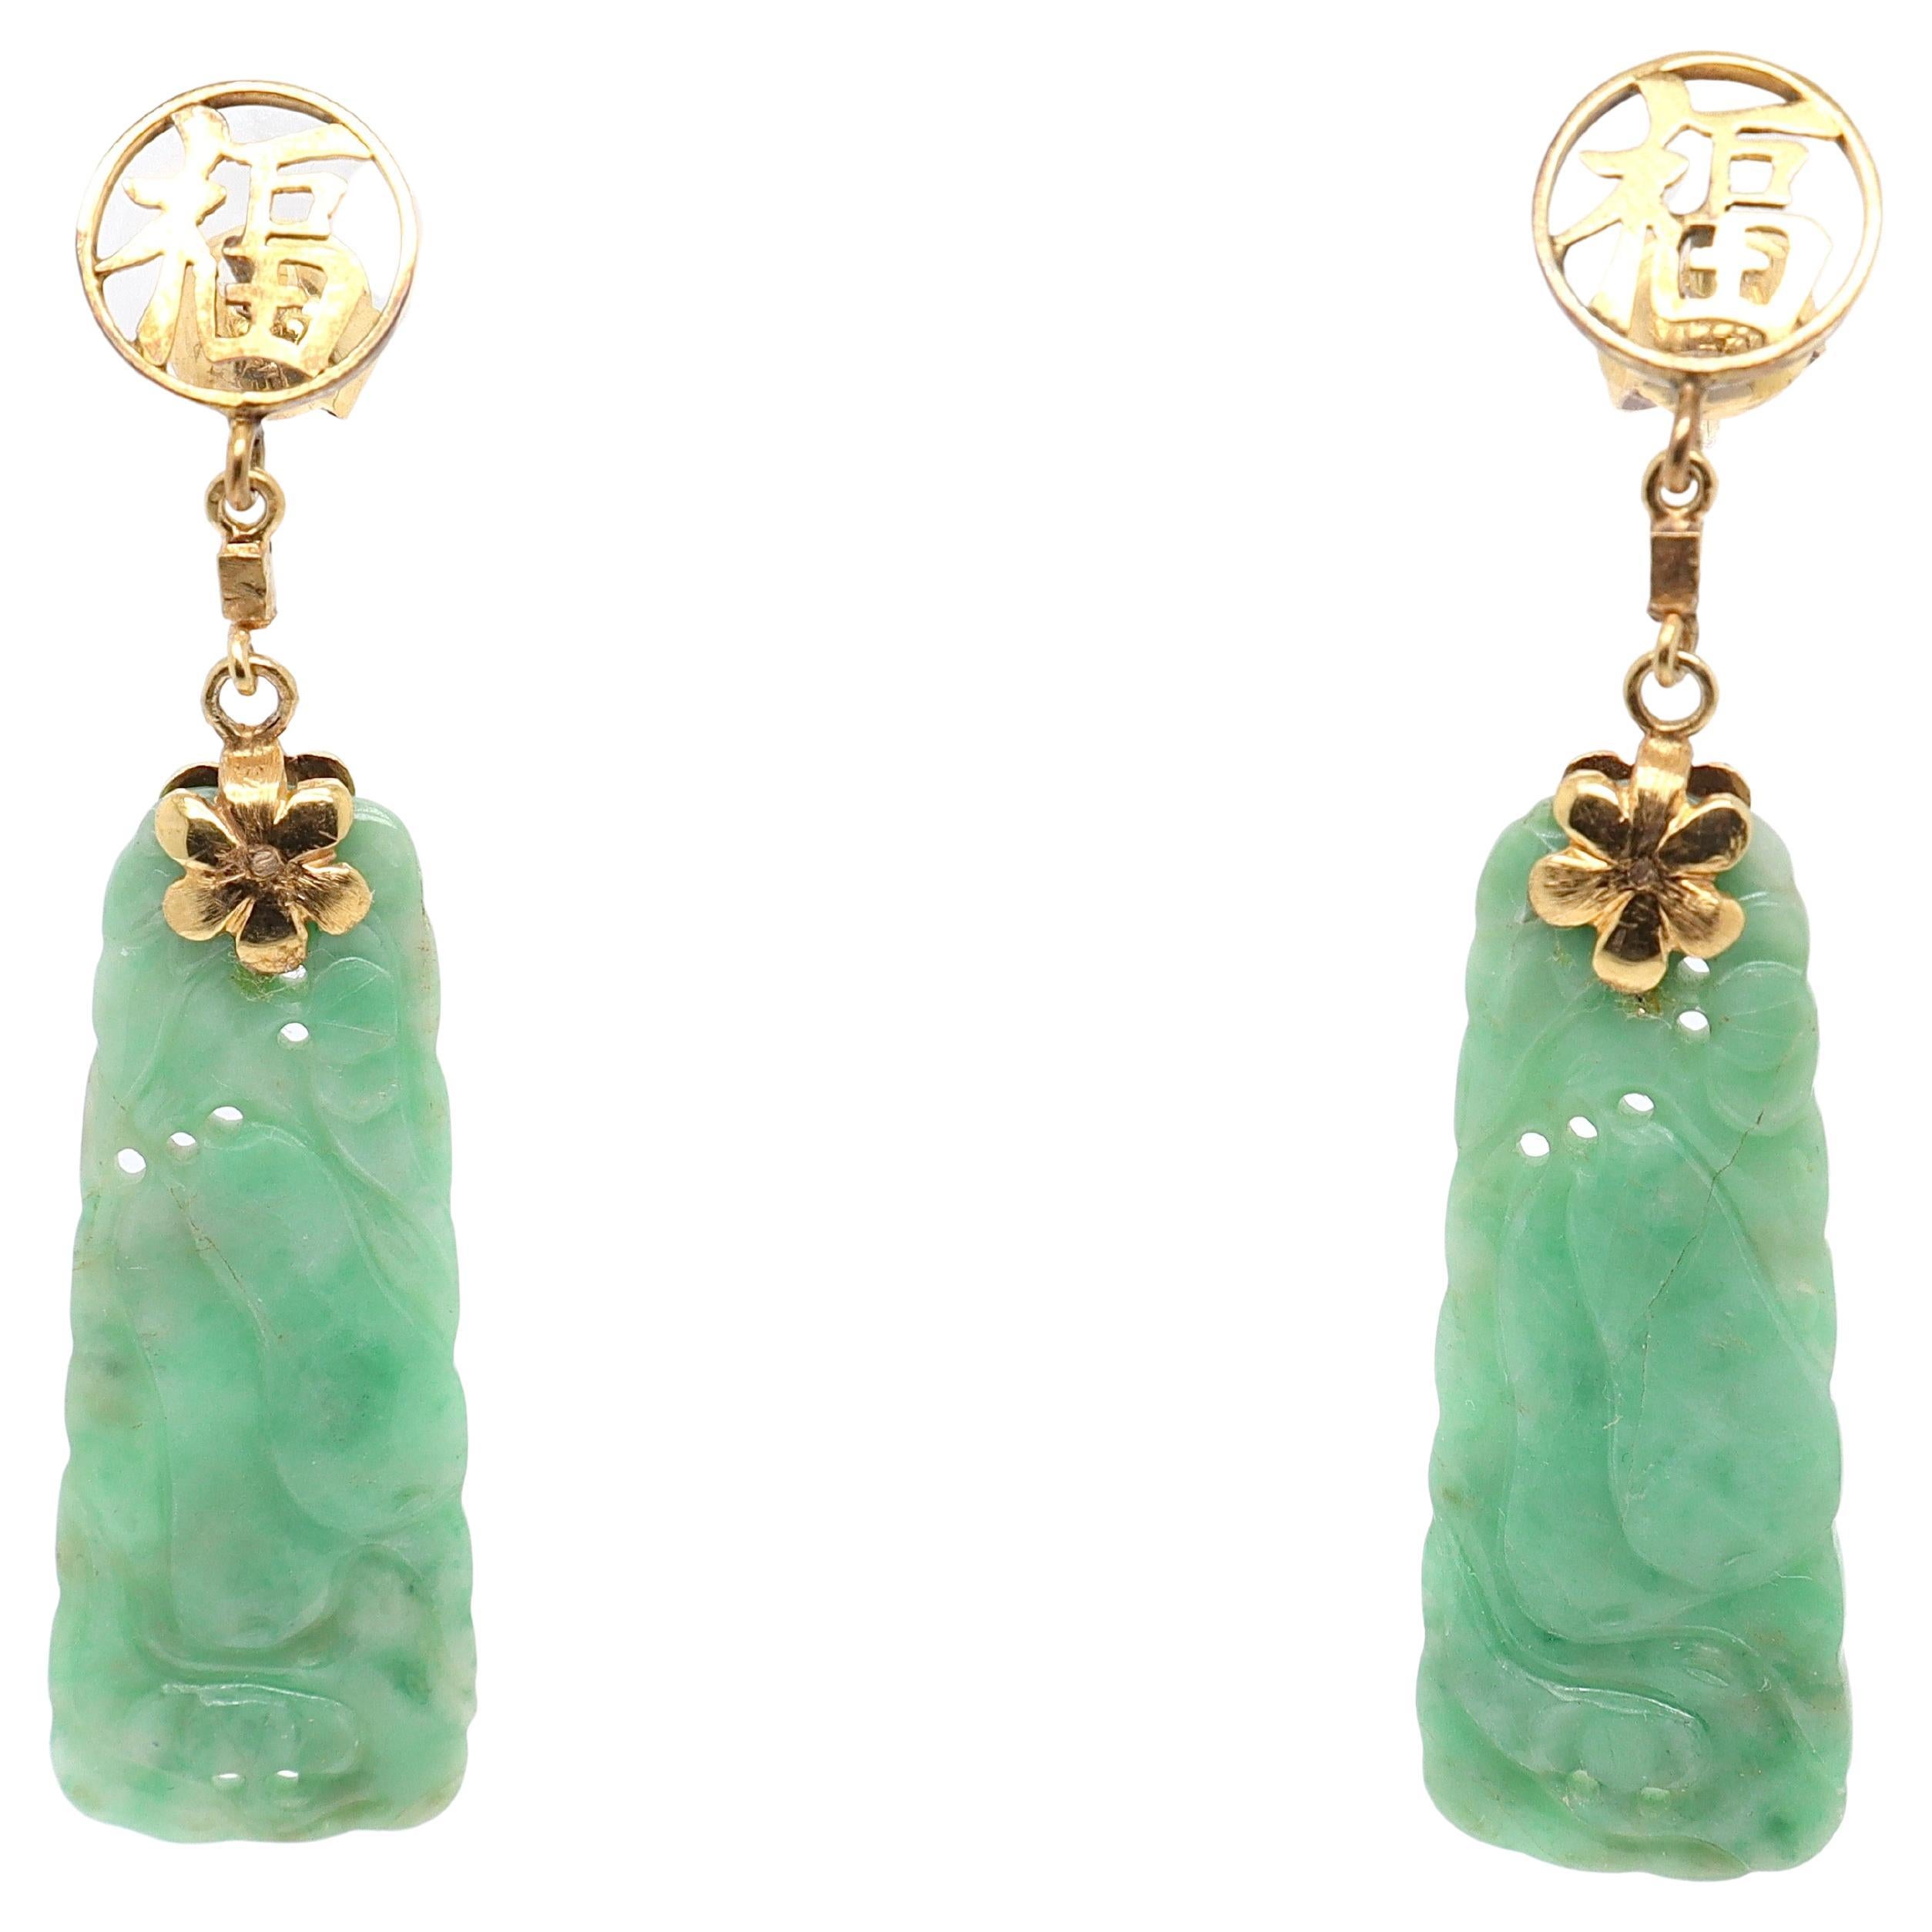 A pair of vintage Chinese gold & jade earrings.

In 14K gold.

Each jade is decorated with carved pears and suspended from findings in the shape of the Chinese character for 